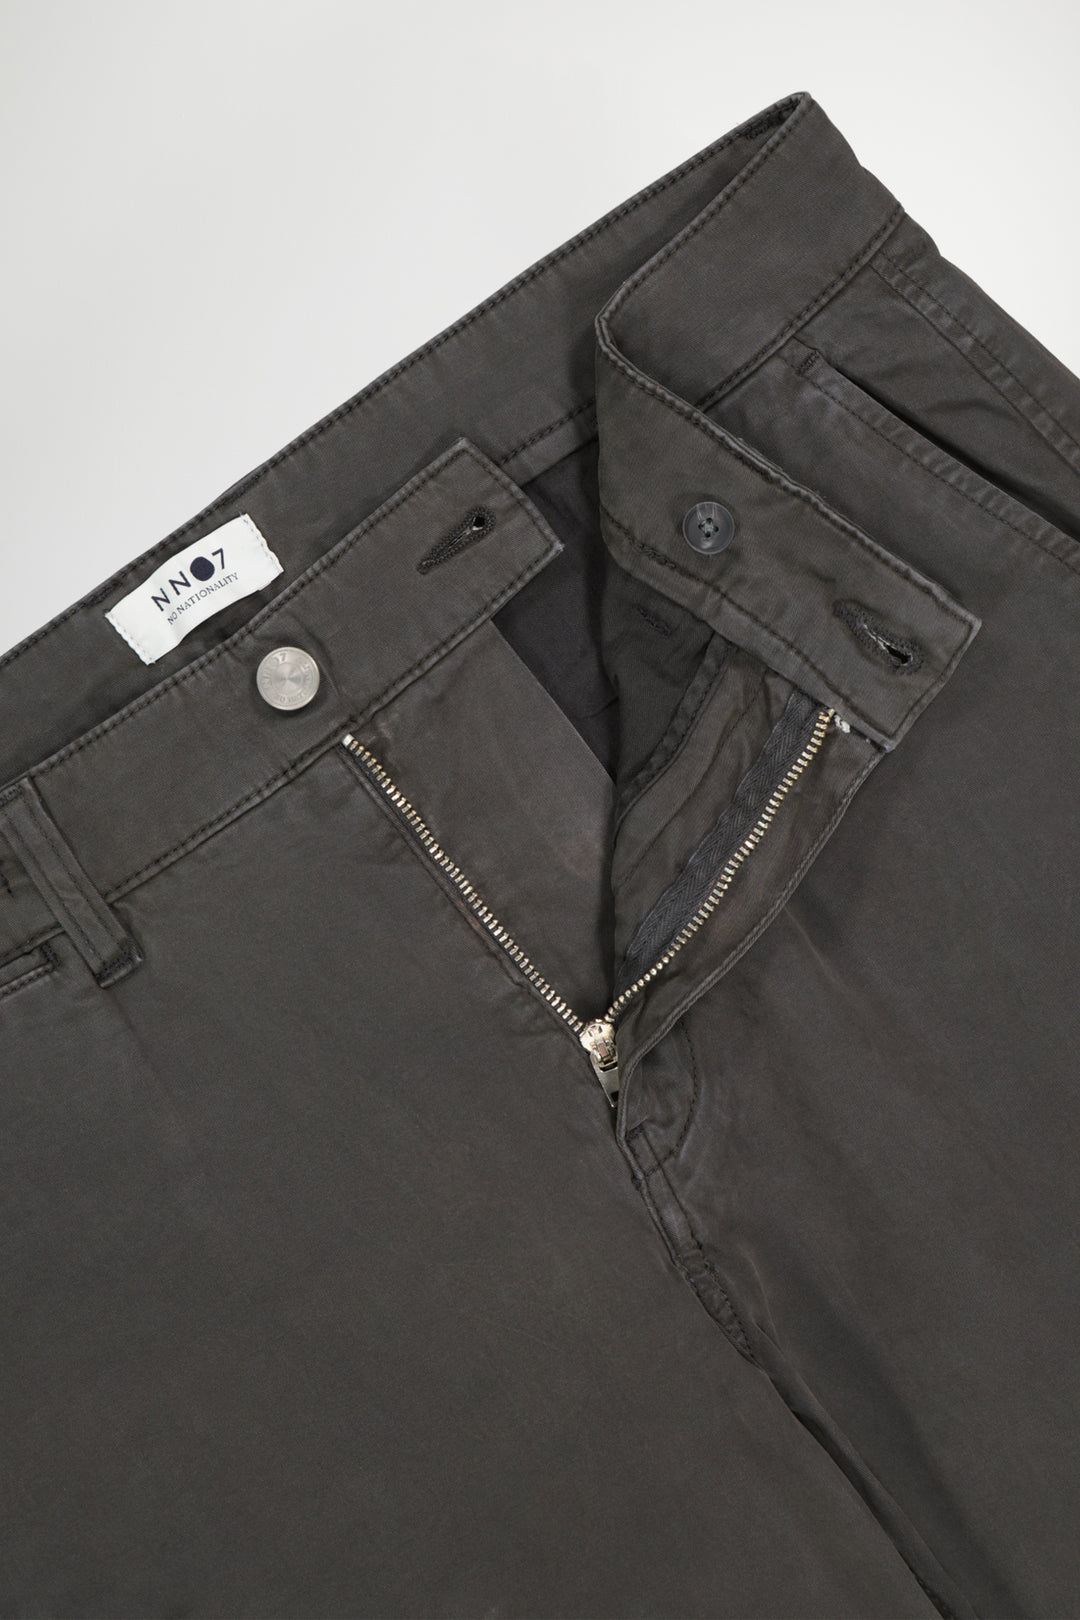 NN07 - Marco 1400 Classic Chino in Dark Army | Buster McGee